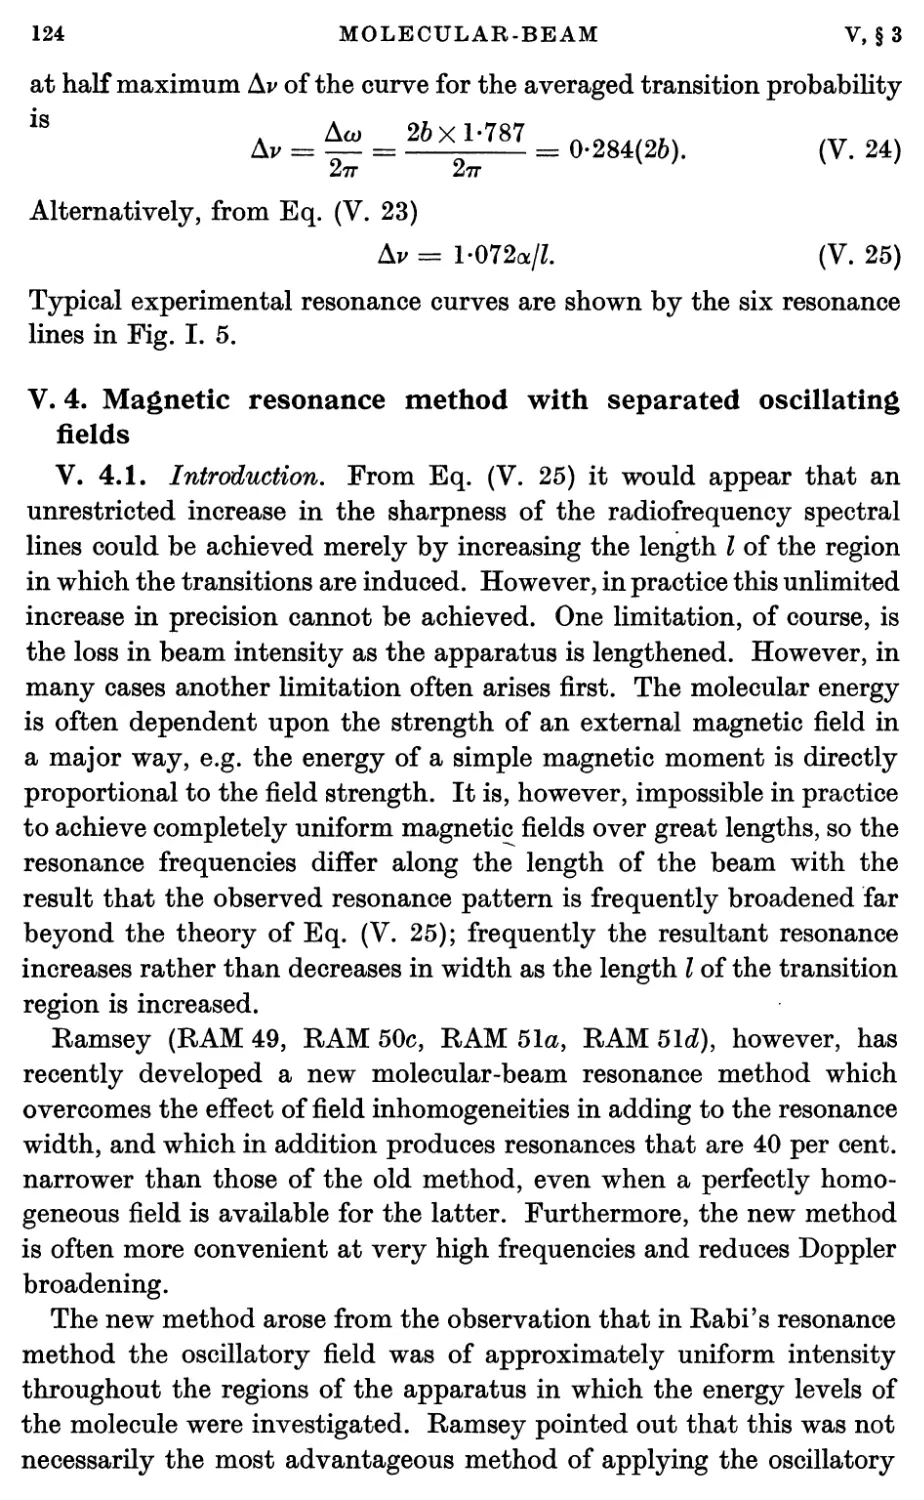 V.4. Magnetic Resonance Method with Separated Oscillating Fields